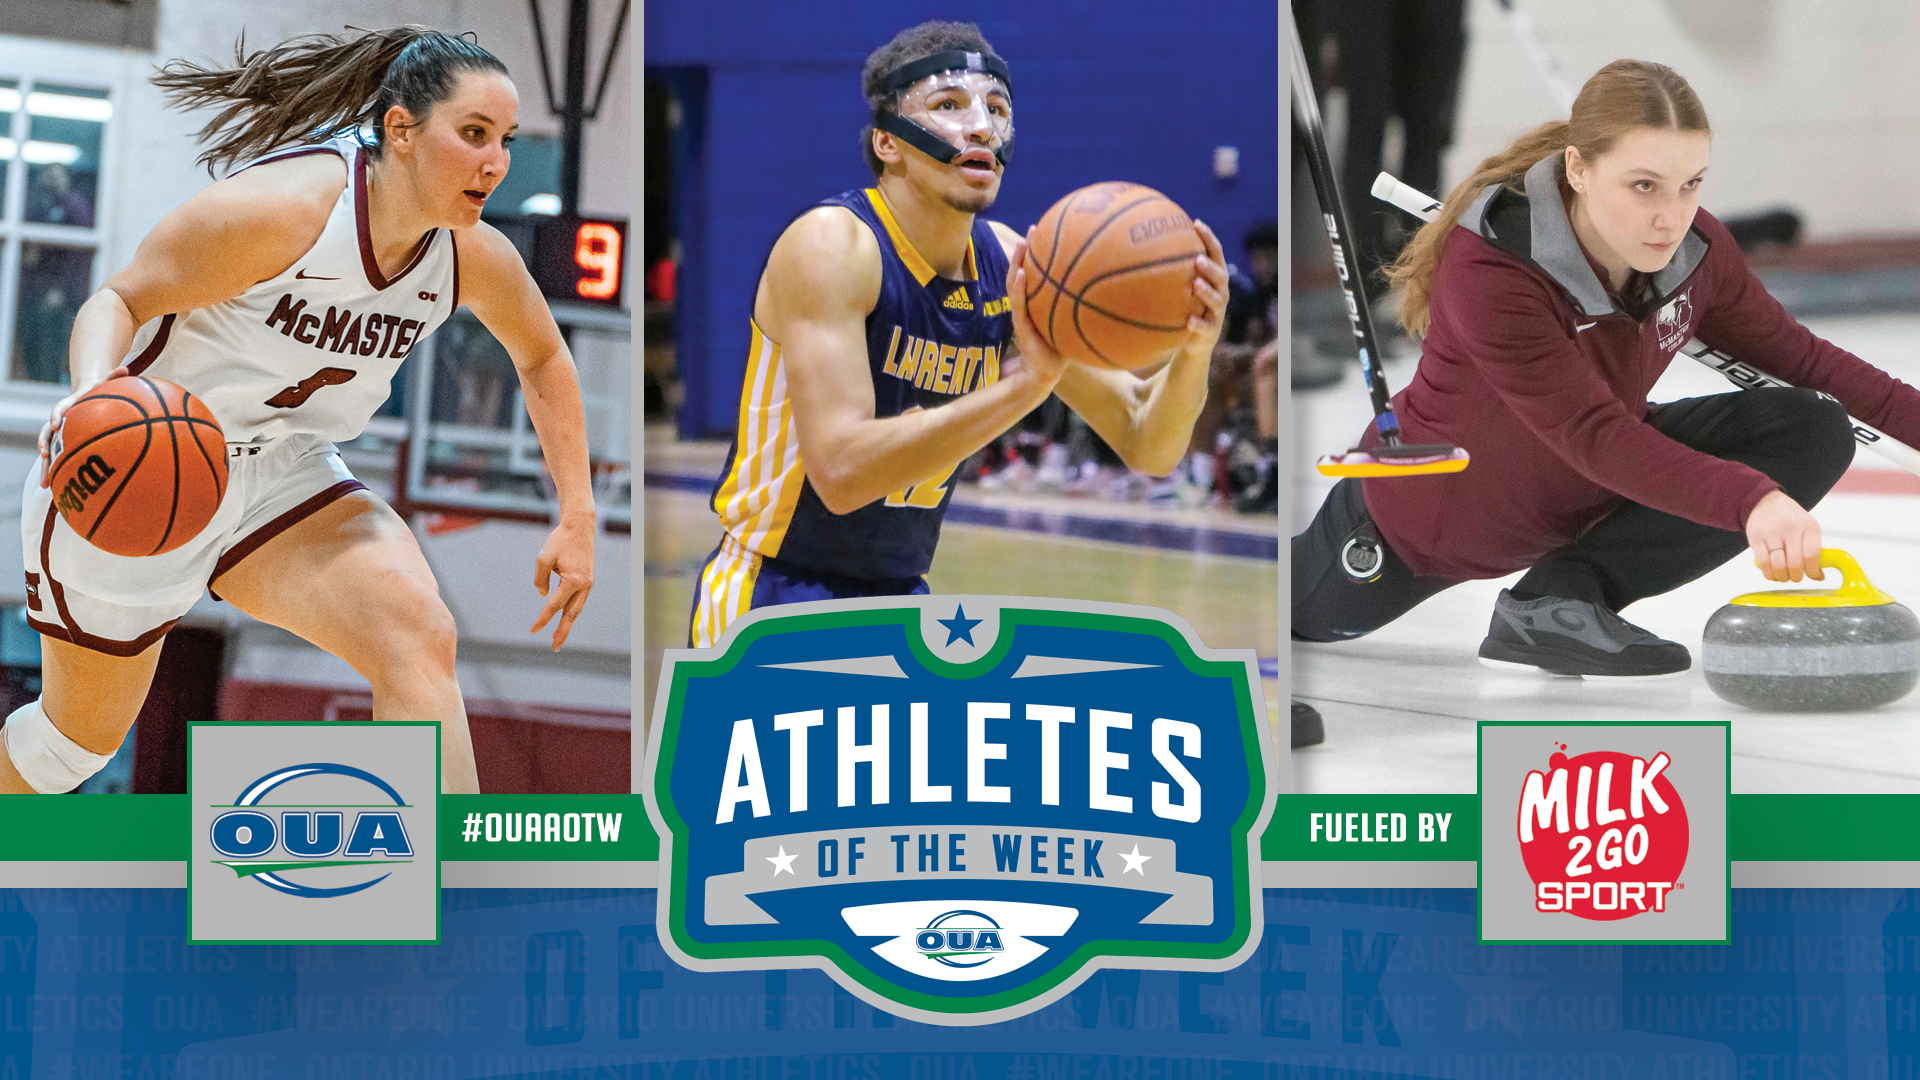 Gates, Lacroix, Robert named OUA athletes of the week